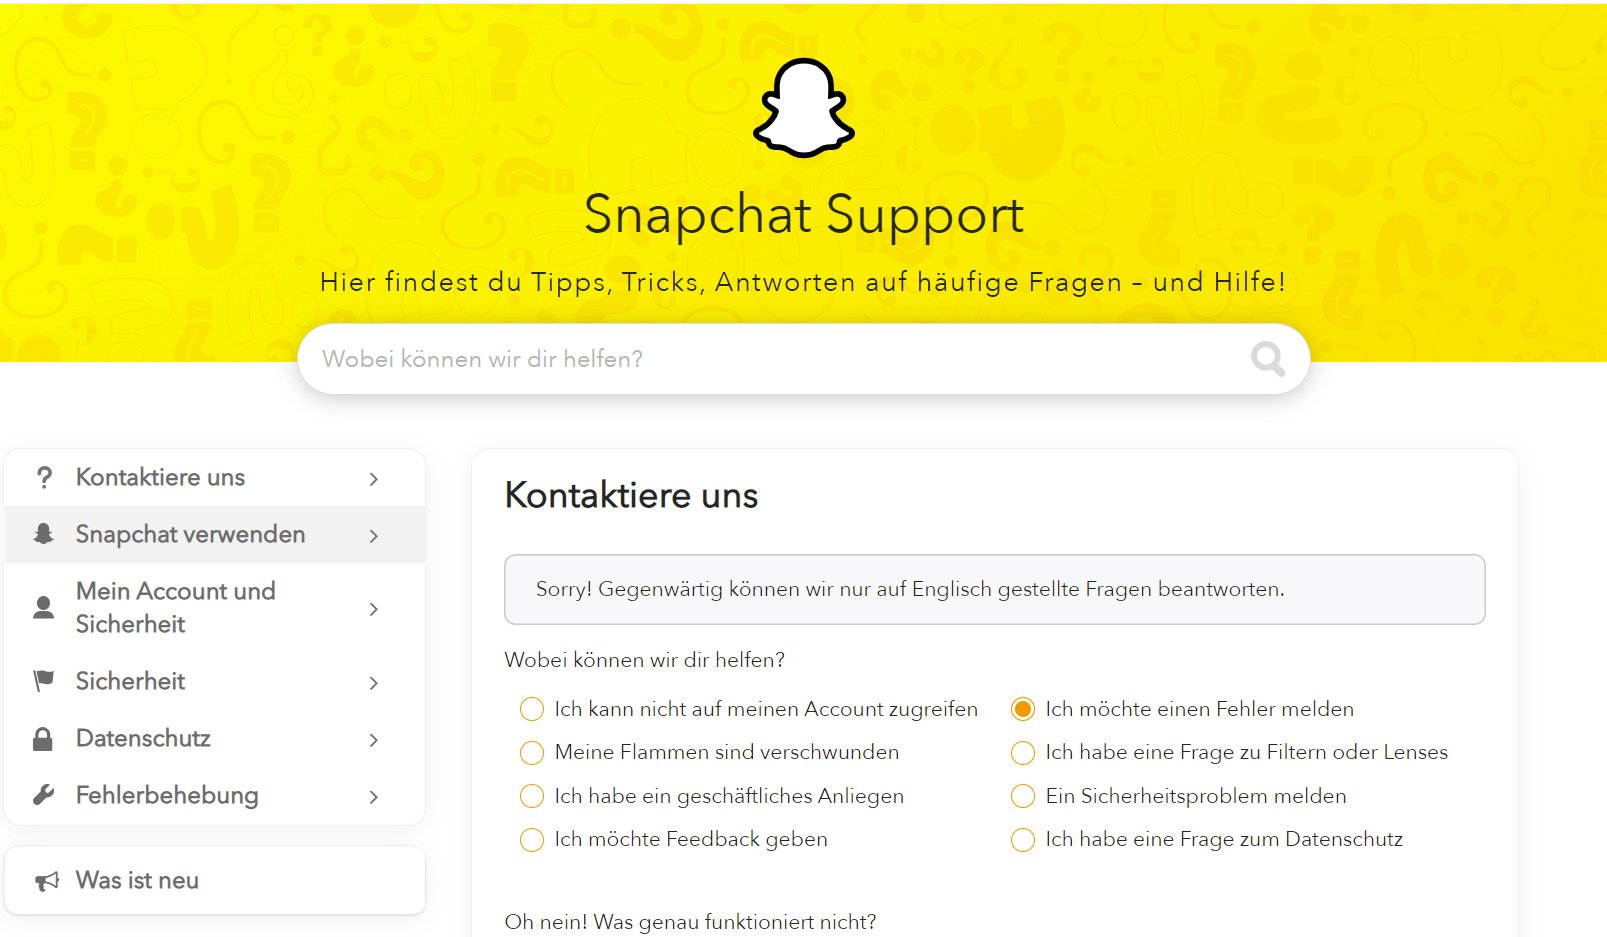 contact snapchat support